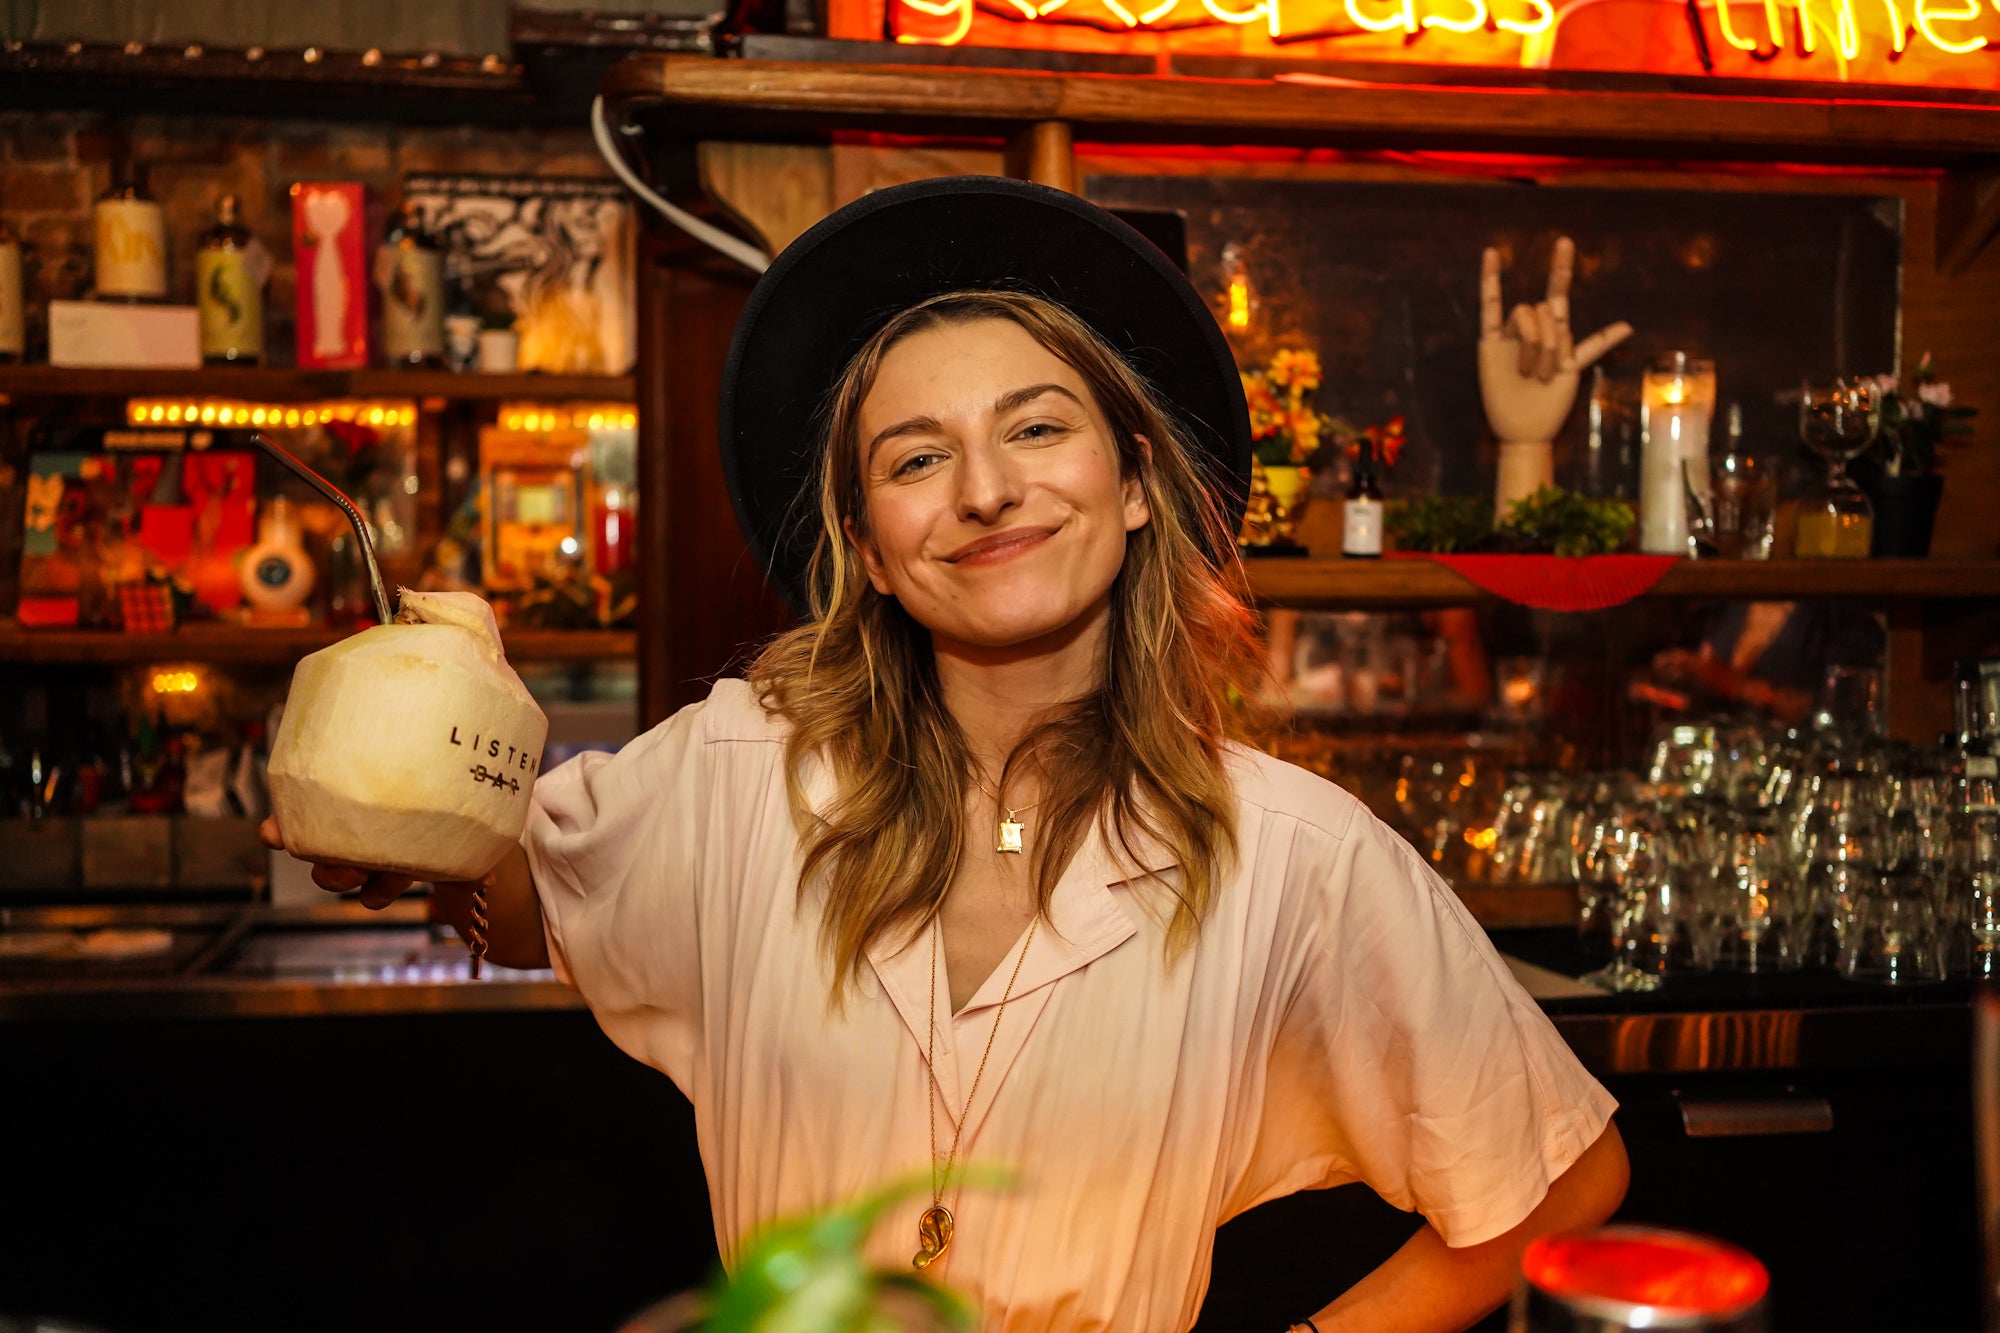 Booze is no longer an integral part of a fun night out at New York’s Listen Bar